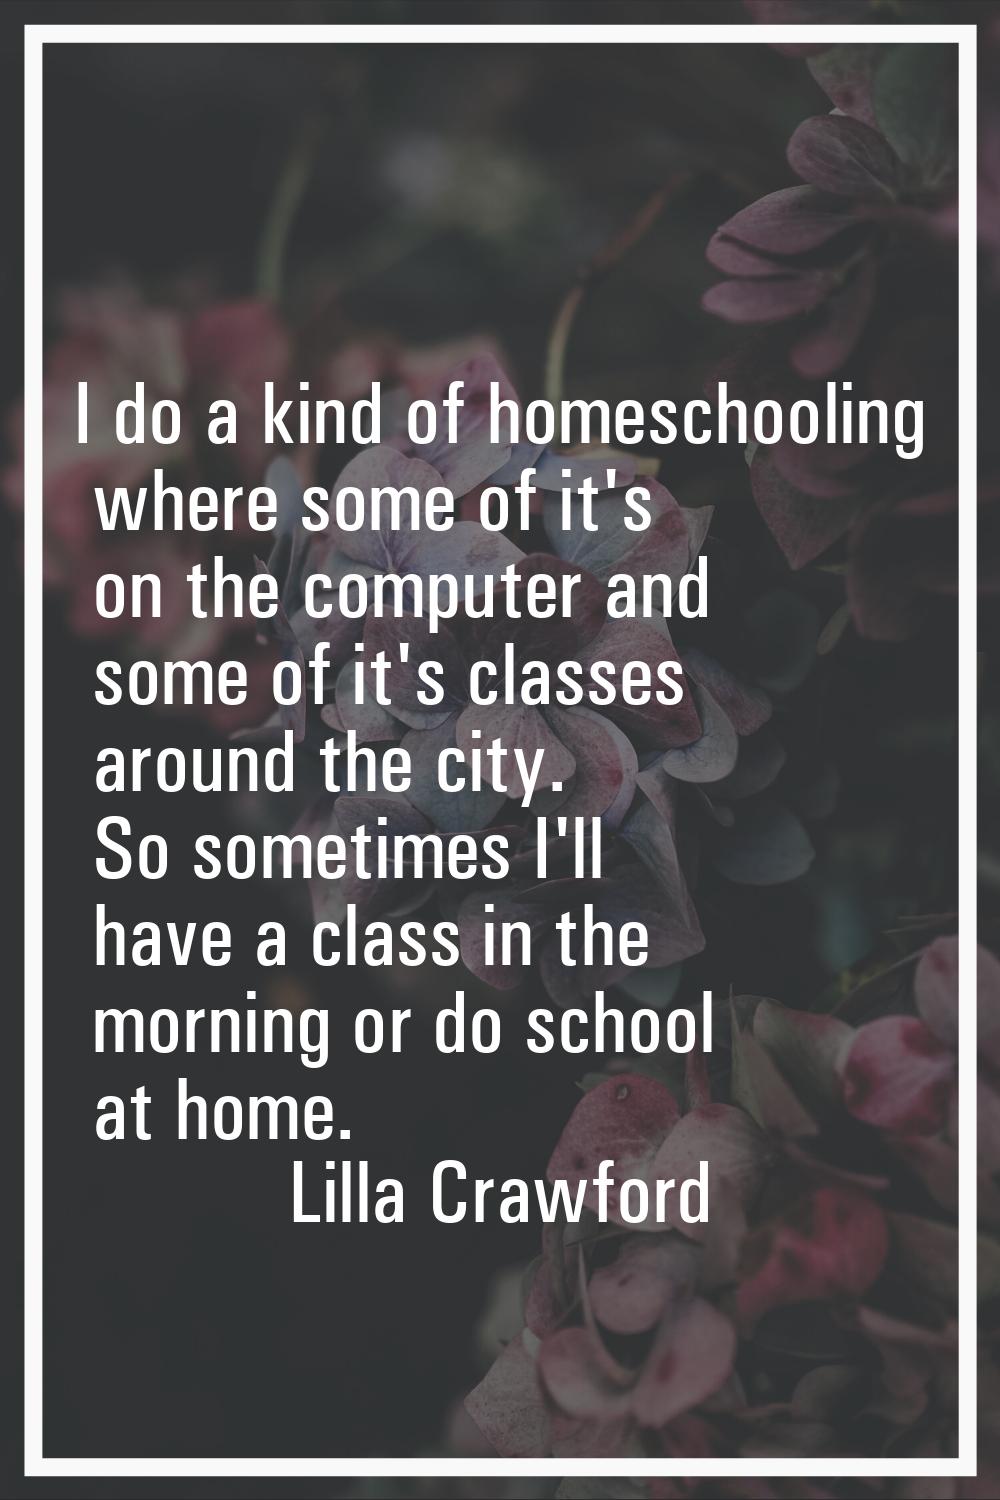 I do a kind of homeschooling where some of it's on the computer and some of it's classes around the